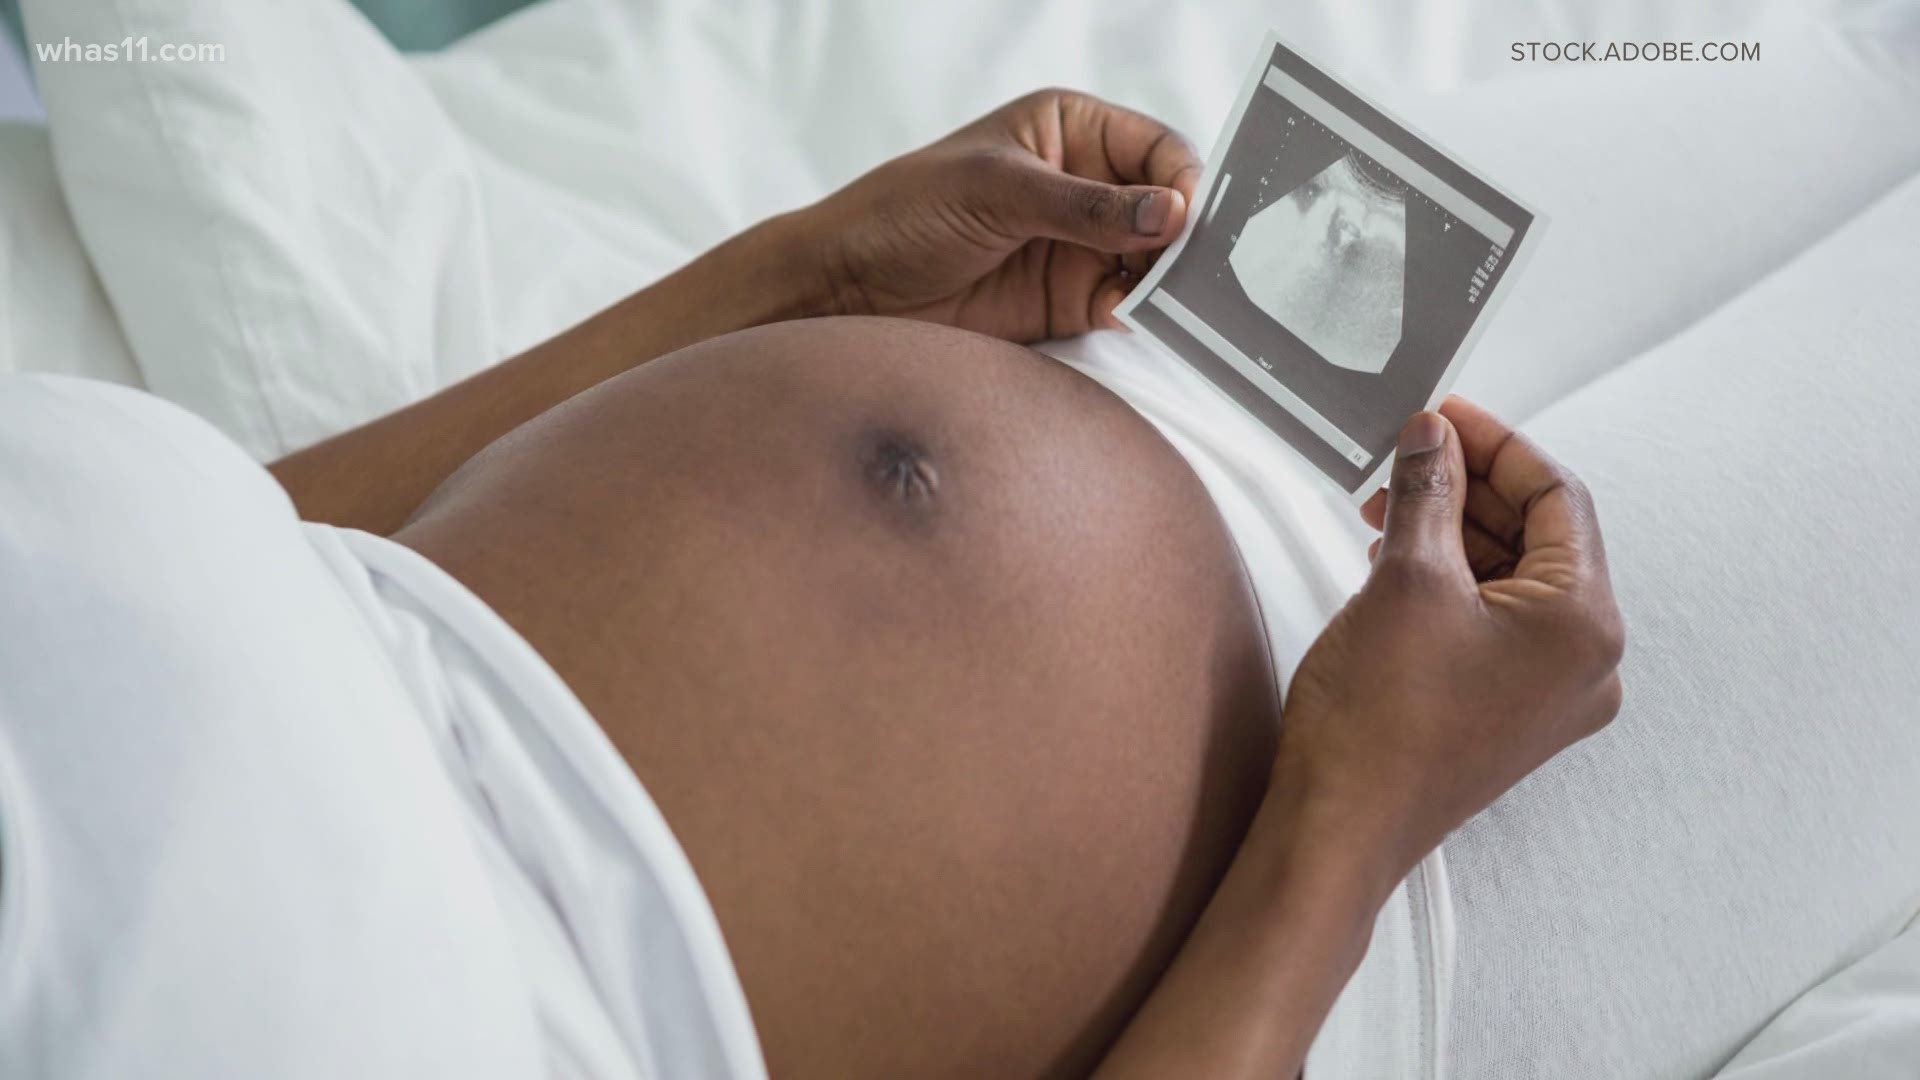 2018 data showed the city's maternal mortality rate is two times higher for Black women. The Women's Caucus recently held a webinar to discuss ideas.